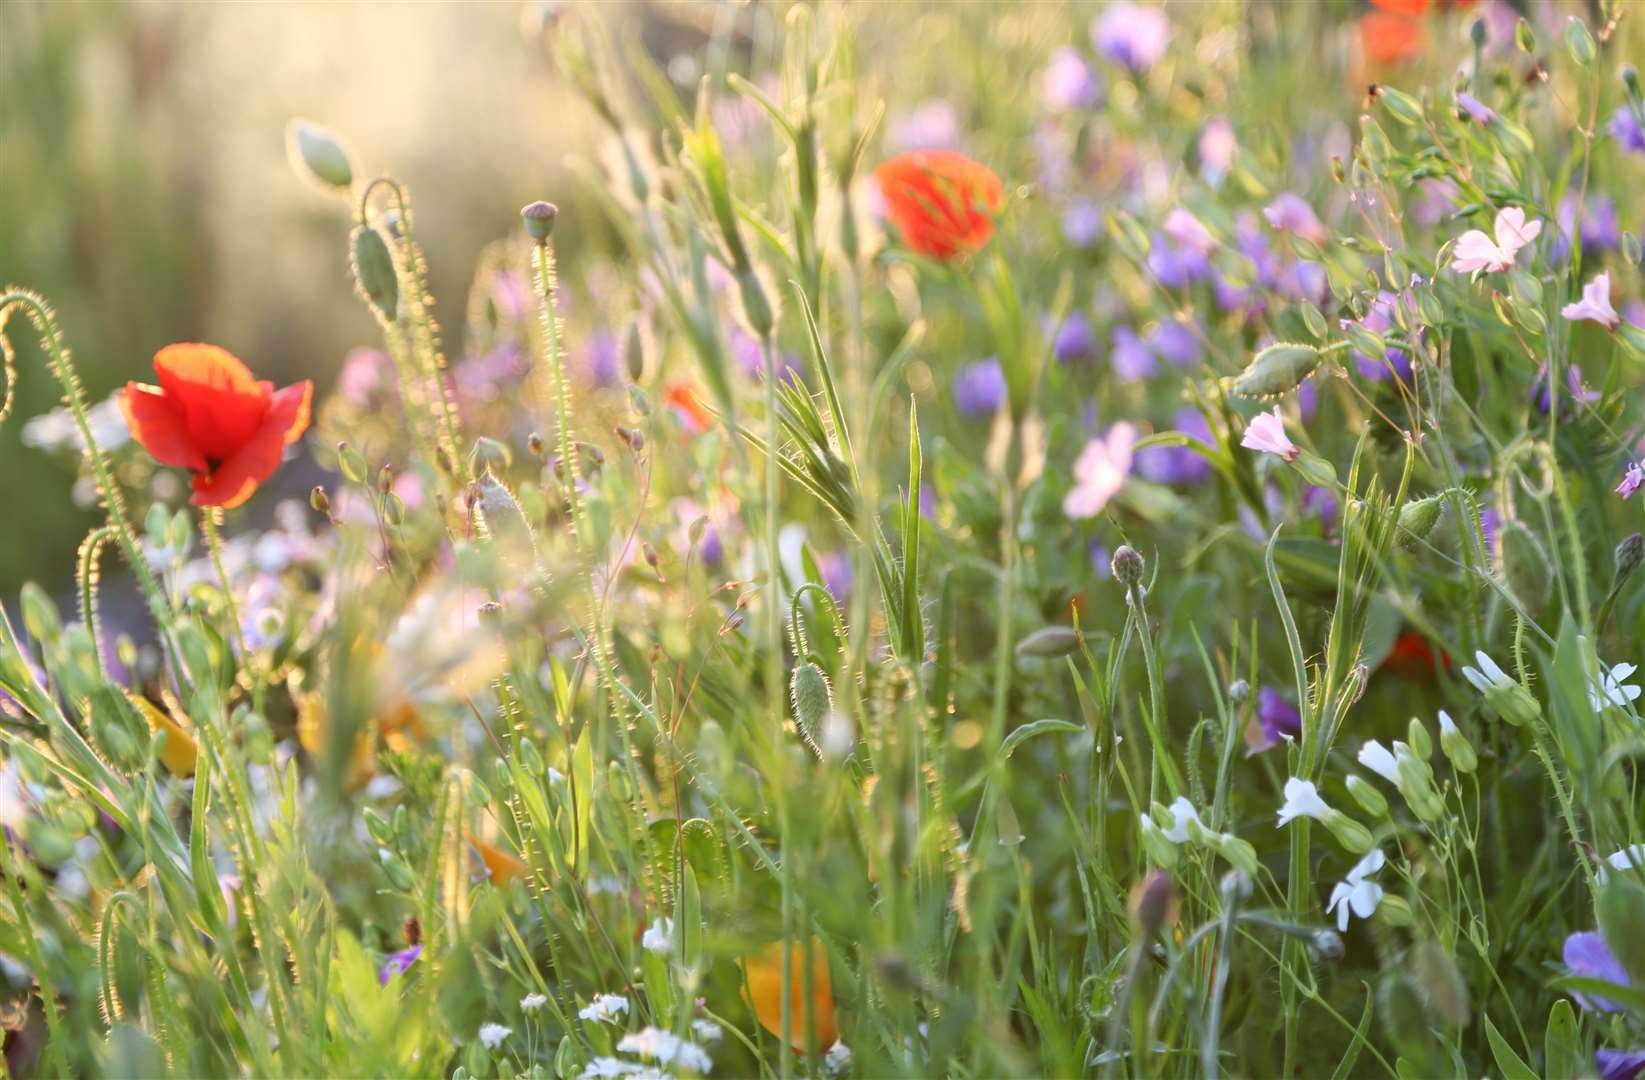 Minute flower bugs live among wildflowers and in parks and gardens. Image: iStock.